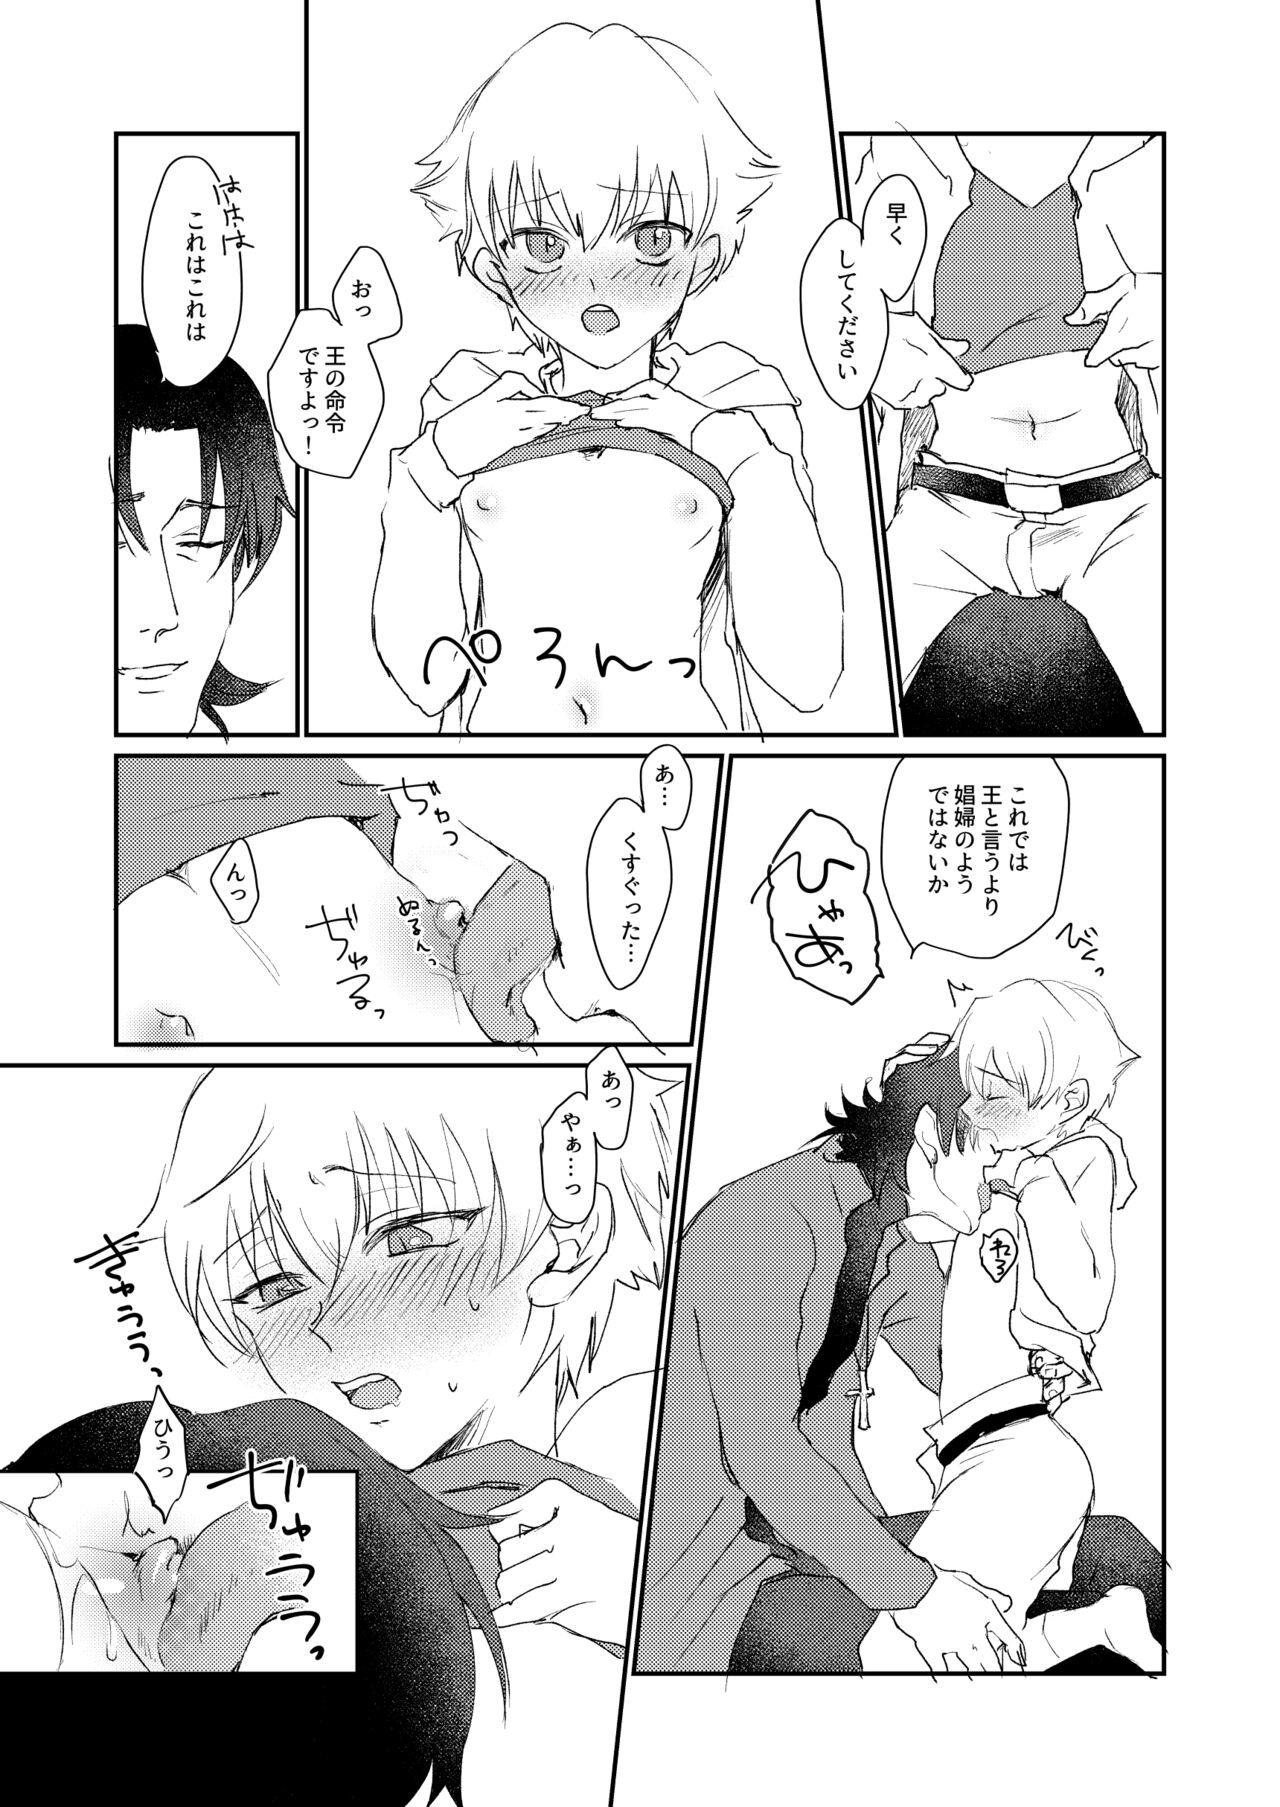 Petite Teenager ARE YOU KIDDING? - Fate zero Studs - Page 10